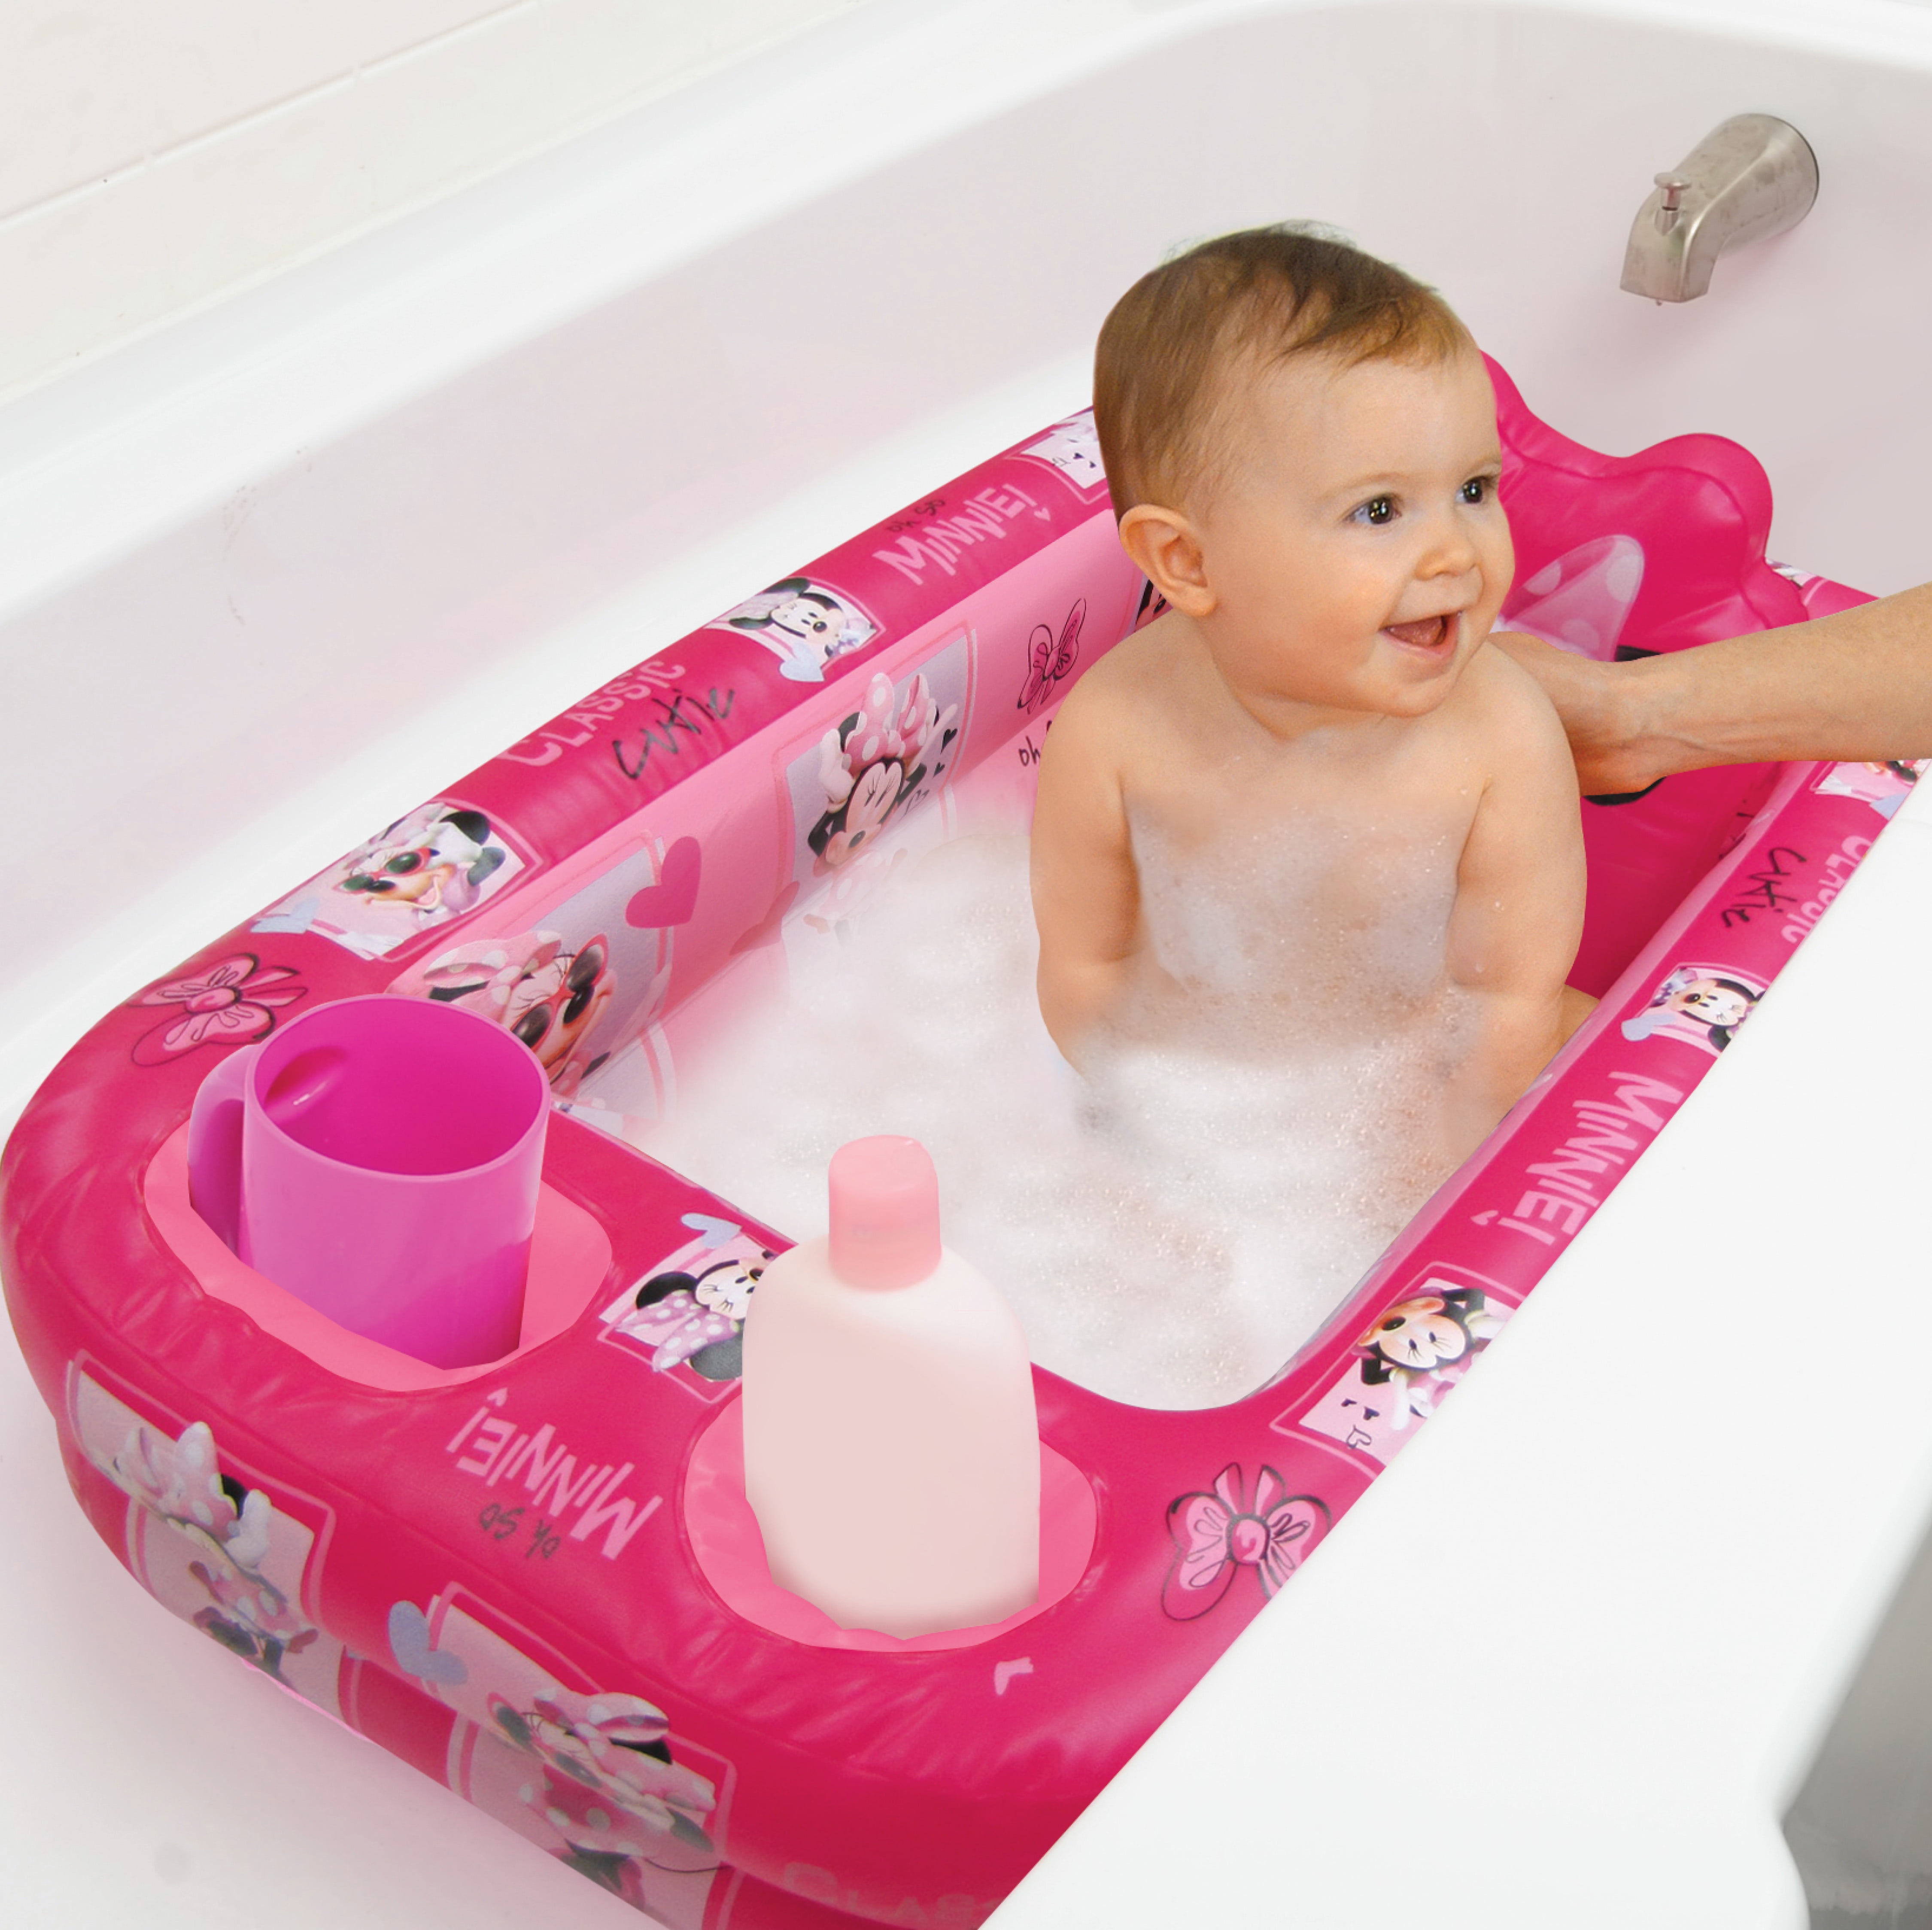 NEW Parents Choice Inflatable Safety Bathtub for Home or Travel FREE SHIPPING 